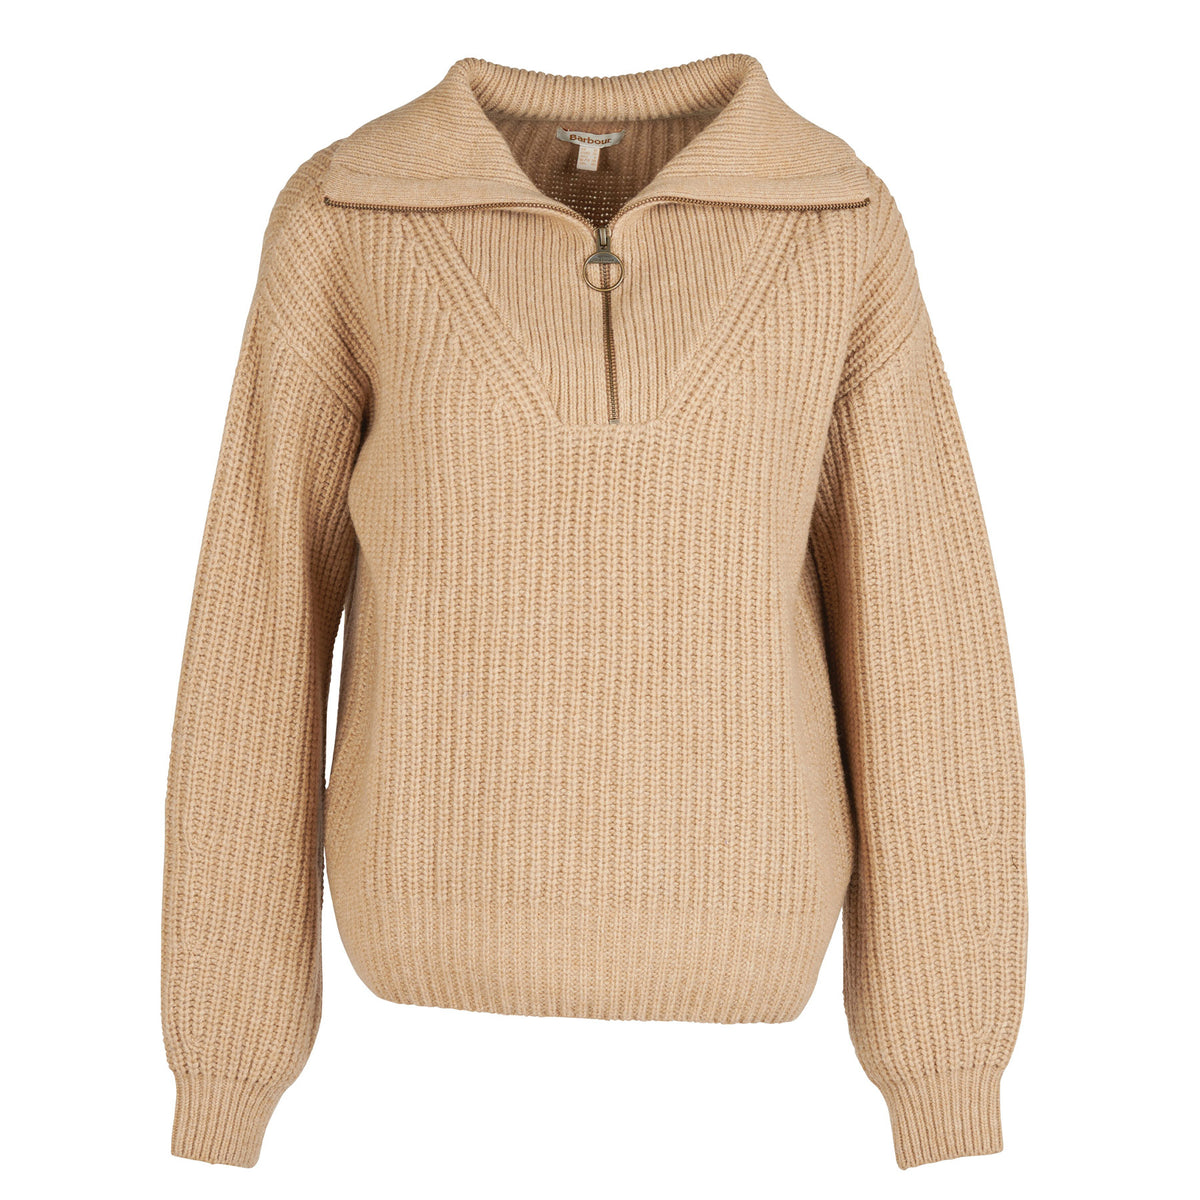 Hero image featuring the Barbour Stavia 3/4 pullover Knit in light brown with a brass zipper.